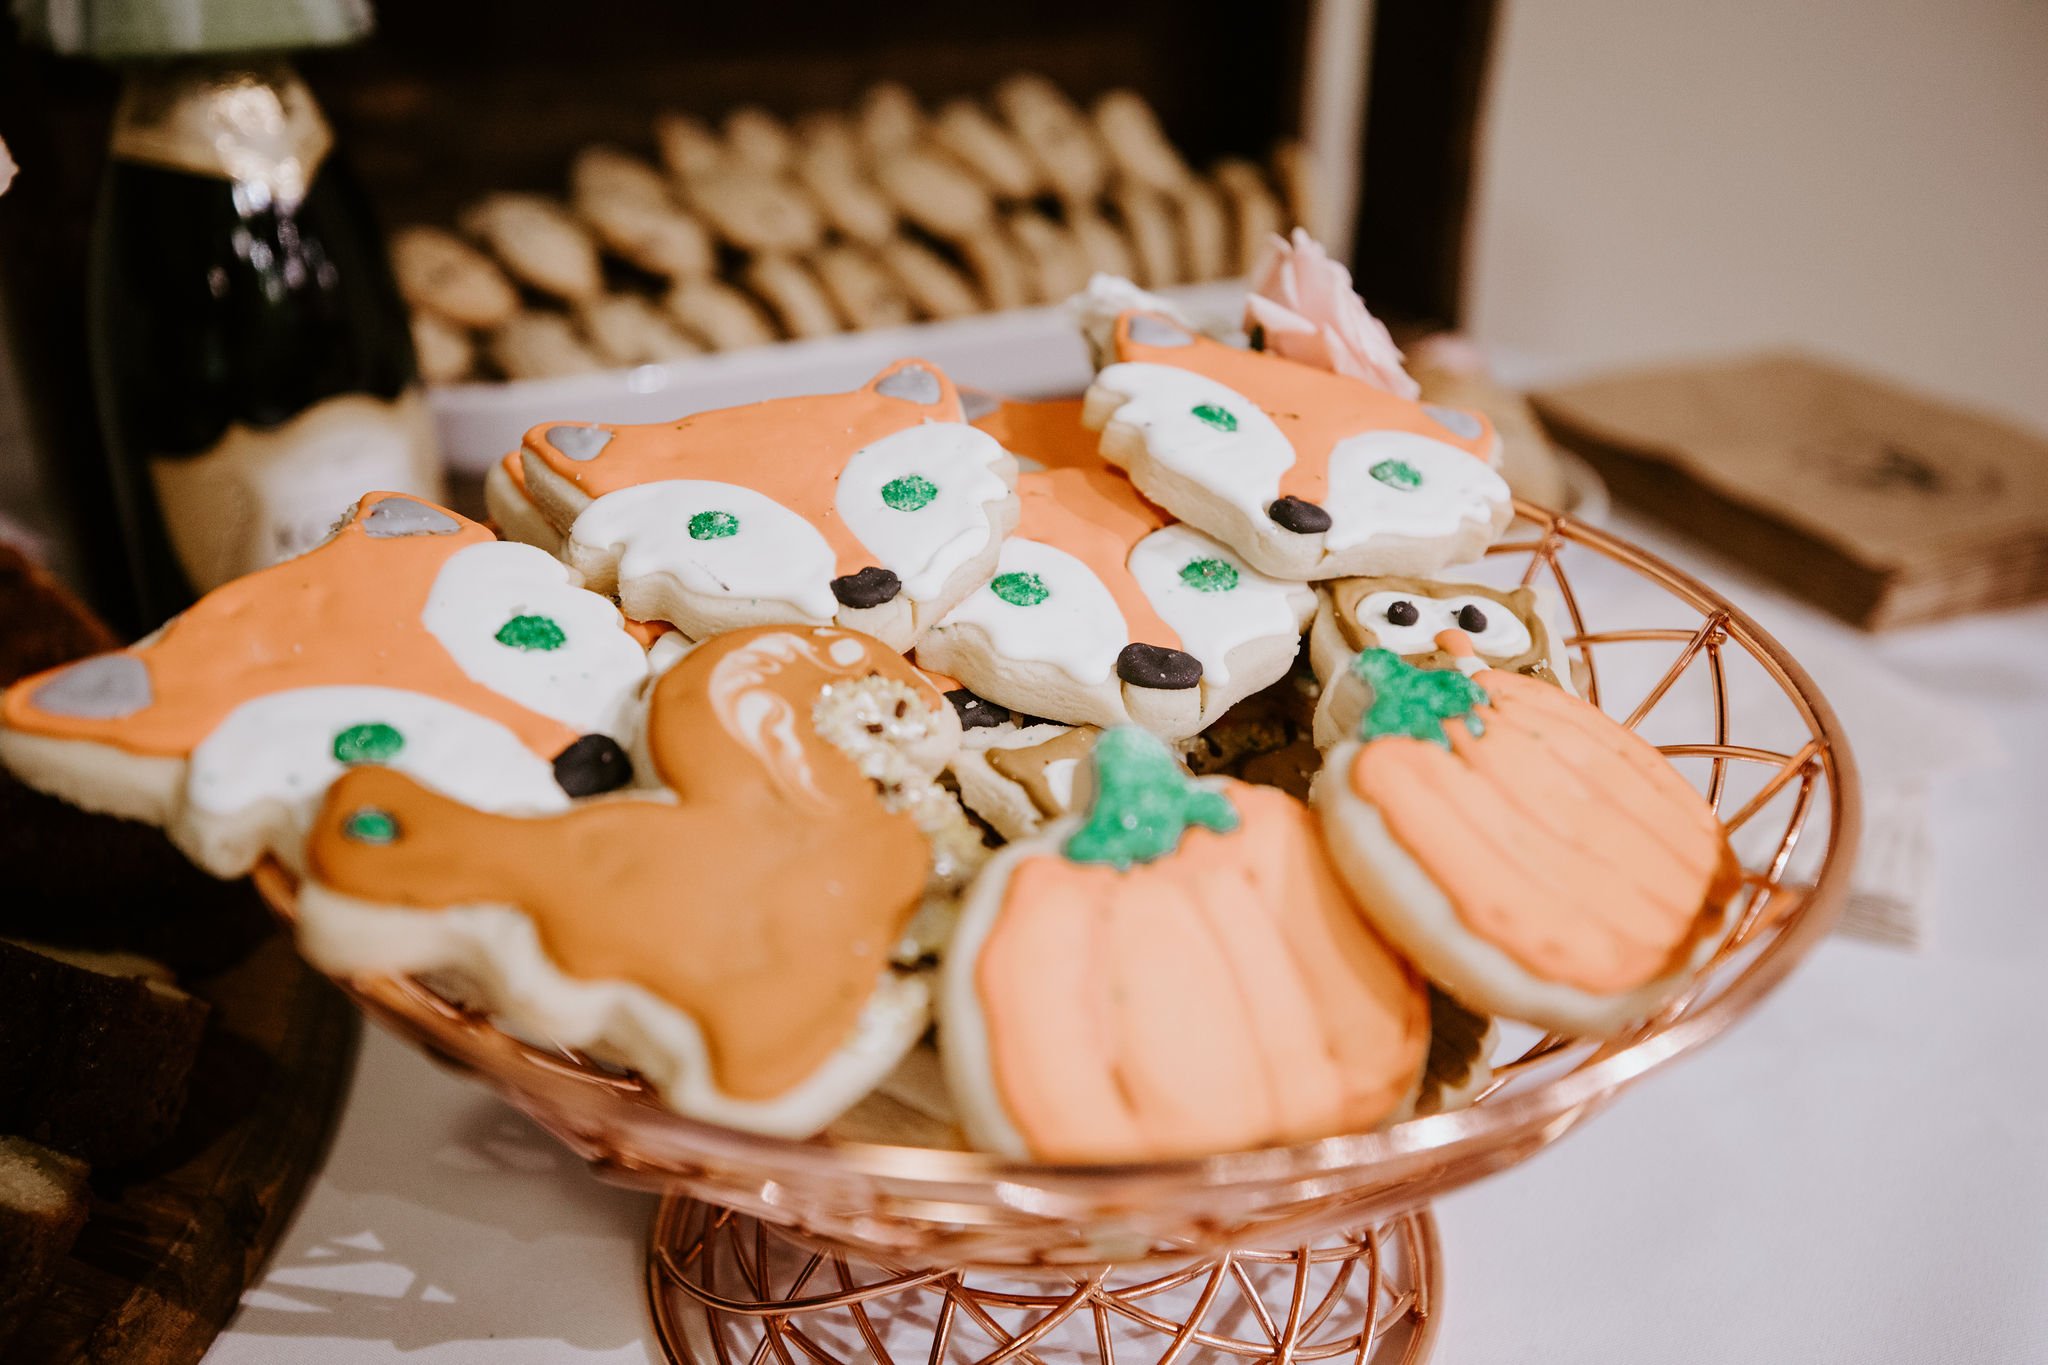 www.santabarbarawedding.com | Geoff and Lyndsi Photography | Santa Barbara Museum of Natural History | Jamie Mangone of LuJane Events | Baking the Goods | I’ll Have What She’s Having | Fall Cookies